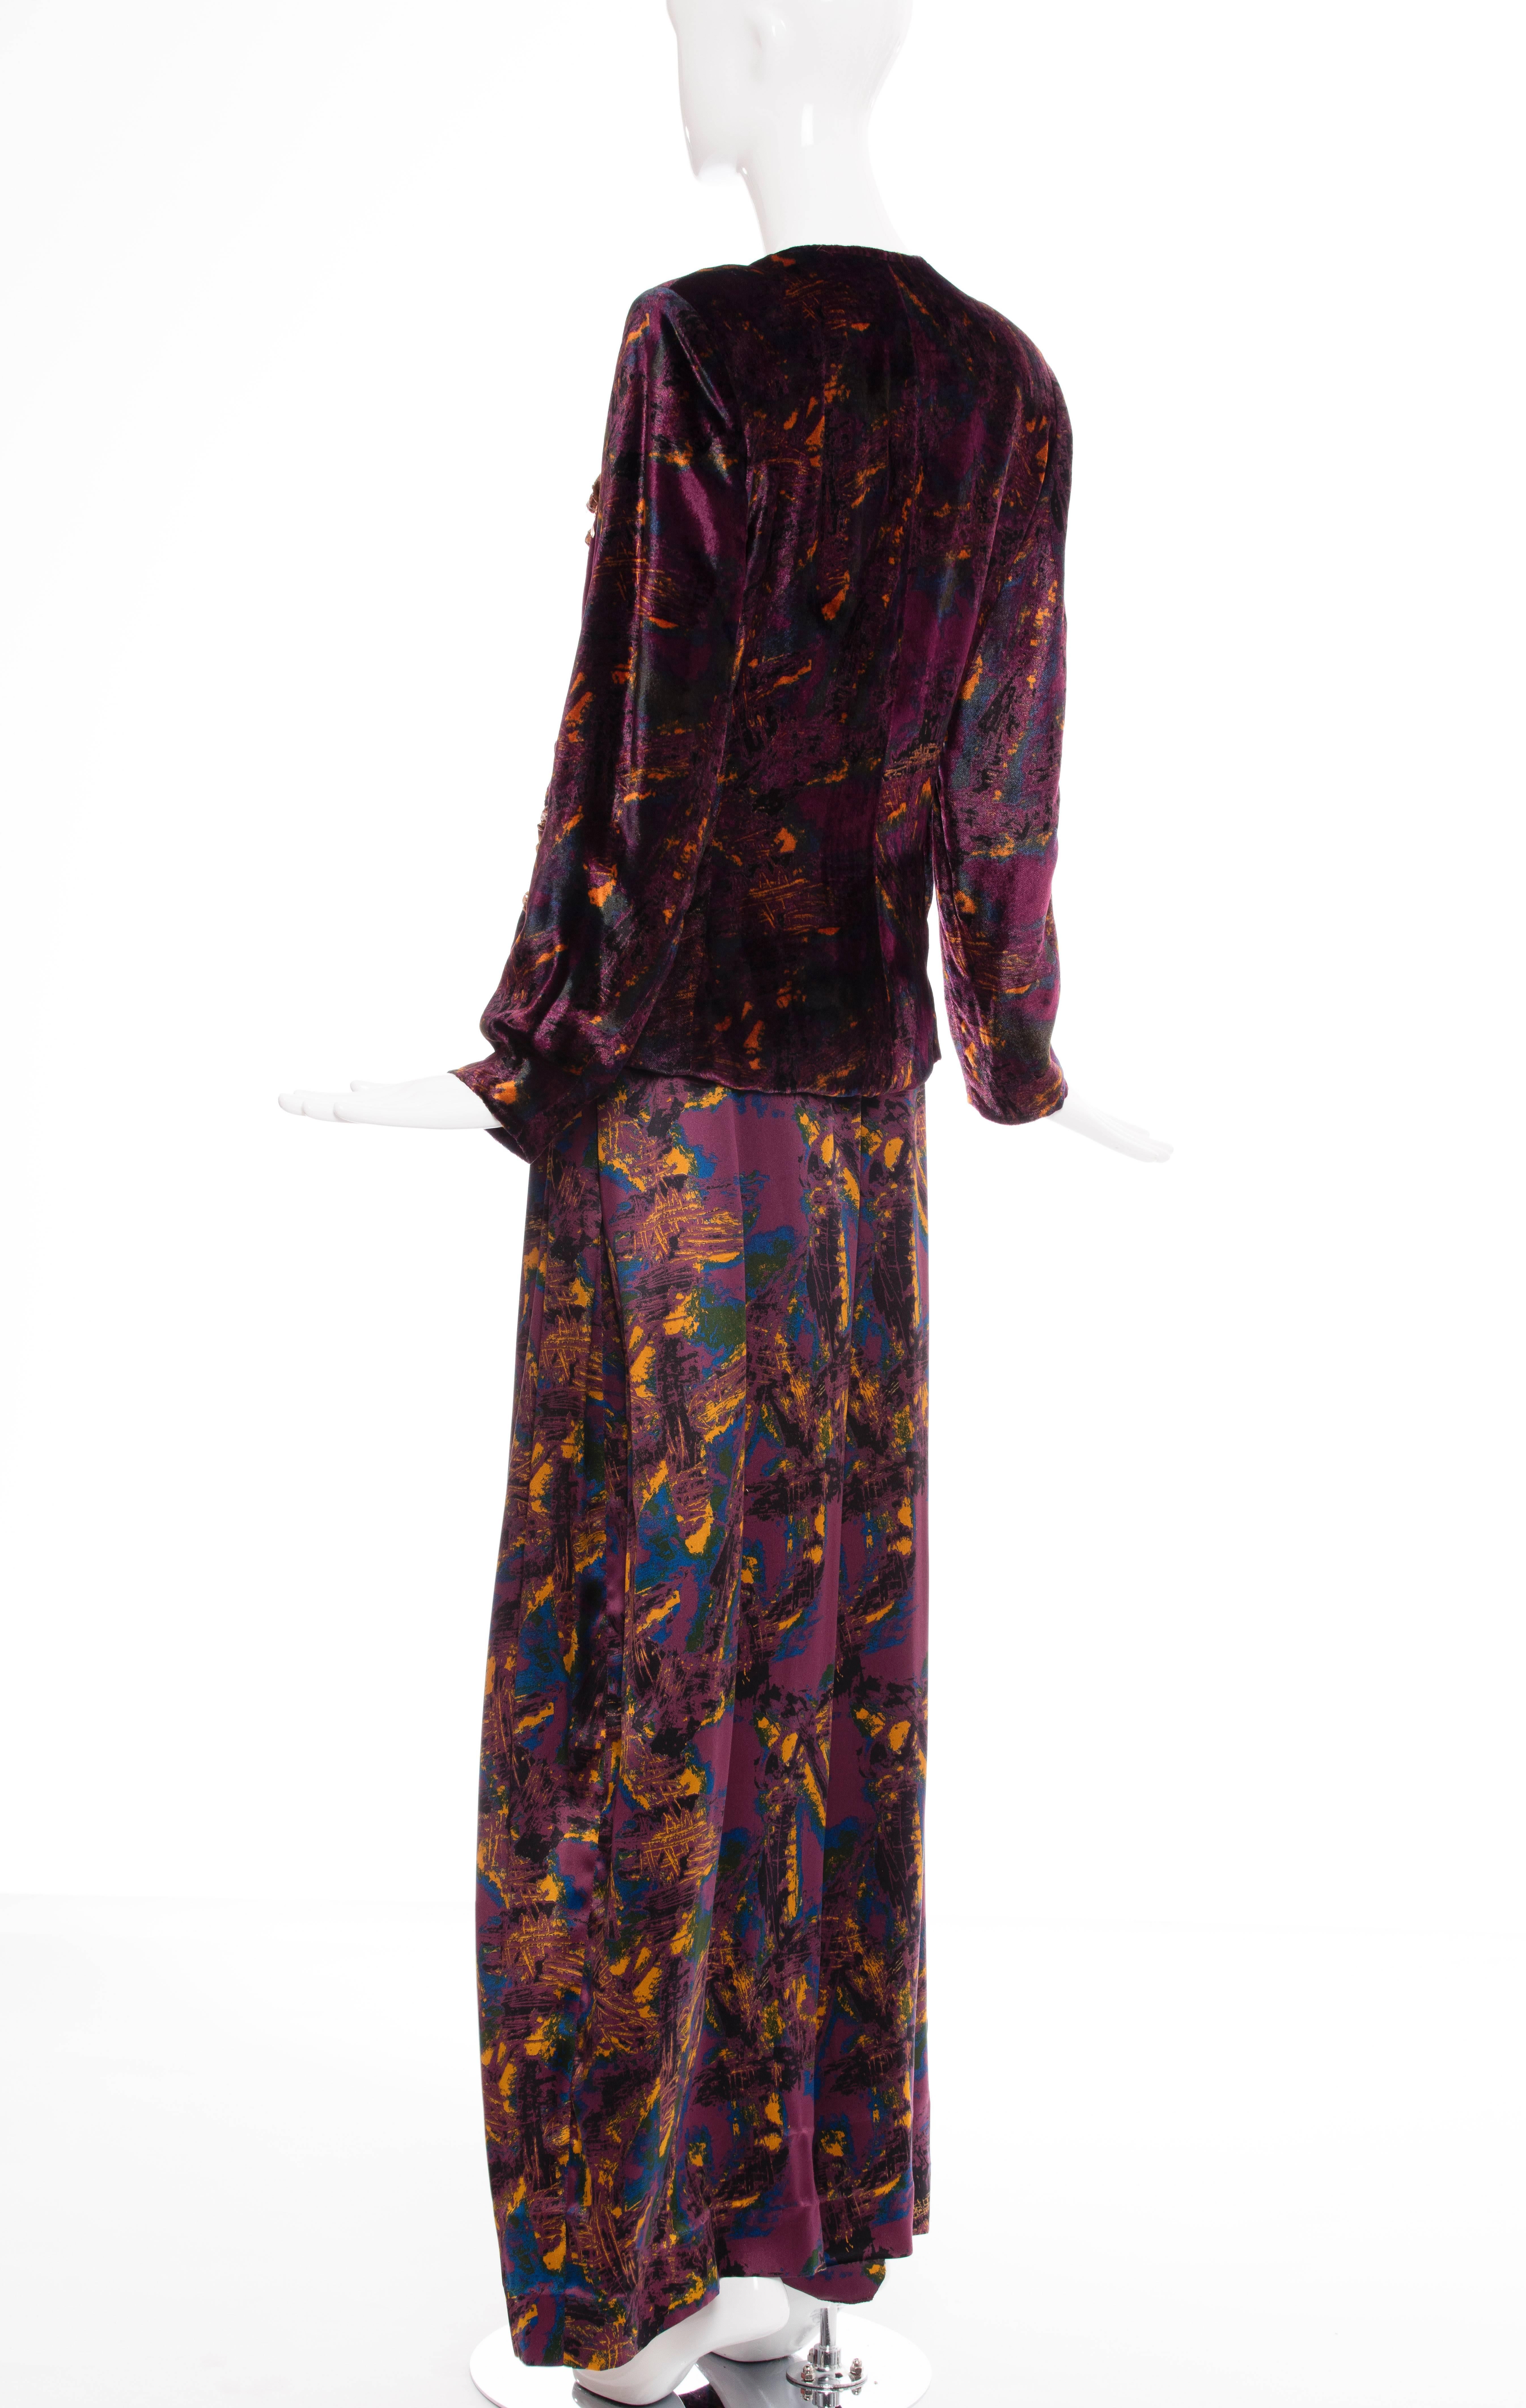 Christian Lacroix Printed Silk Charmeuse Palazzo Pant Suit, Circa 1980's For Sale 1